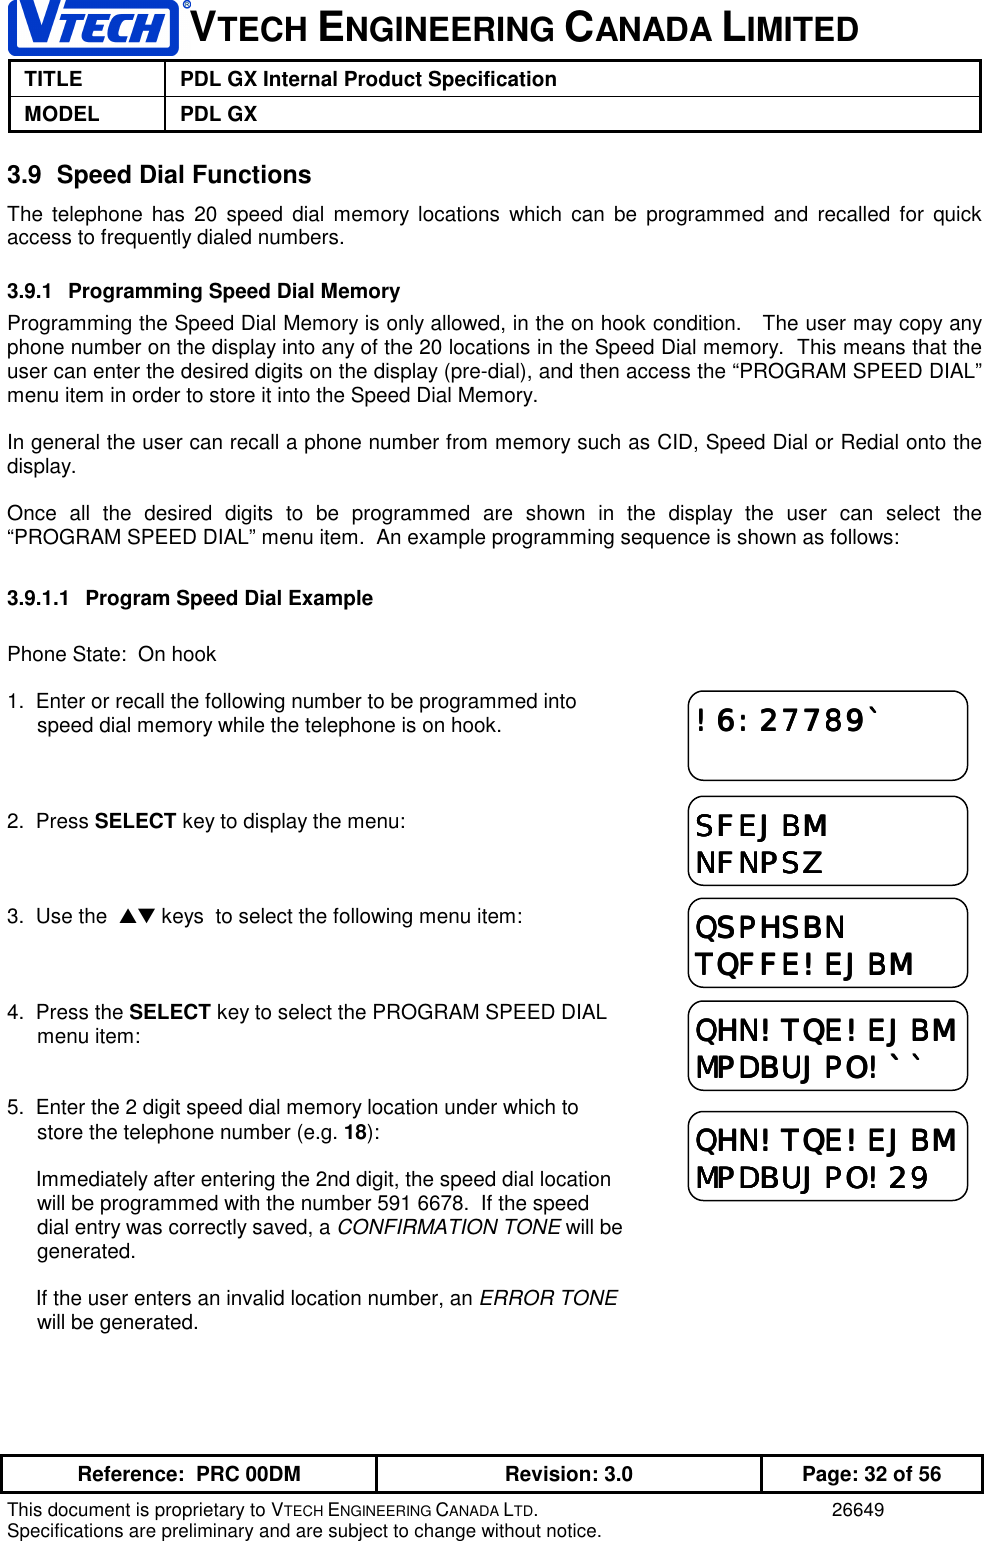 VTECH ENGINEERING CANADA LIMITEDTITLE PDL GX Internal Product SpecificationMODEL PDL GXReference:  PRC 00DM Revision: 3.0 Page: 32 of 56This document is proprietary to VTECH ENGINEERING CANADA LTD. 26649Specifications are preliminary and are subject to change without notice.3.9  Speed Dial FunctionsThe telephone has 20 speed dial memory locations which can be programmed and recalled for quickaccess to frequently dialed numbers.3.9.1  Programming Speed Dial MemoryProgramming the Speed Dial Memory is only allowed, in the on hook condition.   The user may copy anyphone number on the display into any of the 20 locations in the Speed Dial memory.  This means that theuser can enter the desired digits on the display (pre-dial), and then access the “PROGRAM SPEED DIAL”menu item in order to store it into the Speed Dial Memory.In general the user can recall a phone number from memory such as CID, Speed Dial or Redial onto thedisplay.Once all the desired digits to be programmed are shown in the display the user can select the“PROGRAM SPEED DIAL” menu item.  An example programming sequence is shown as follows:3.9.1.1  Program Speed Dial ExamplePhone State:  On hook1.  Enter or recall the following number to be programmed intospeed dial memory while the telephone is on hook.2.  Press SELECT key to display the menu:3.  Use the  ▲▼ keys  to select the following menu item:4.  Press the SELECT key to select the PROGRAM SPEED DIALmenu item:5.  Enter the 2 digit speed dial memory location under which tostore the telephone number (e.g. 18):     Immediately after entering the 2nd digit, the speed dial locationwill be programmed with the number 591 6678.  If the speeddial entry was correctly saved, a CONFIRMATION TONE will begenerated.     If the user enters an invalid location number, an ERROR TONEwill be generated.!6:27789`!6:27789`!6:27789`!6:27789`SFEJBMSFEJBMSFEJBMSFEJBMNFNPSZNFNPSZNFNPSZNFNPSZQSPHSBNQSPHSBNQSPHSBNQSPHSBNTQFFE!EJBMTQFFE!EJBMTQFFE!EJBMTQFFE!EJBMQHN!TQE!EJBMQHN!TQE!EJBMQHN!TQE!EJBMQHN!TQE!EJBMMPDBUJPO!``MPDBUJPO!``MPDBUJPO!``MPDBUJPO!``QHN!TQE!EJBMQHN!TQE!EJBMQHN!TQE!EJBMQHN!TQE!EJBMMPDBUJPO!29MPDBUJPO!29MPDBUJPO!29MPDBUJPO!29